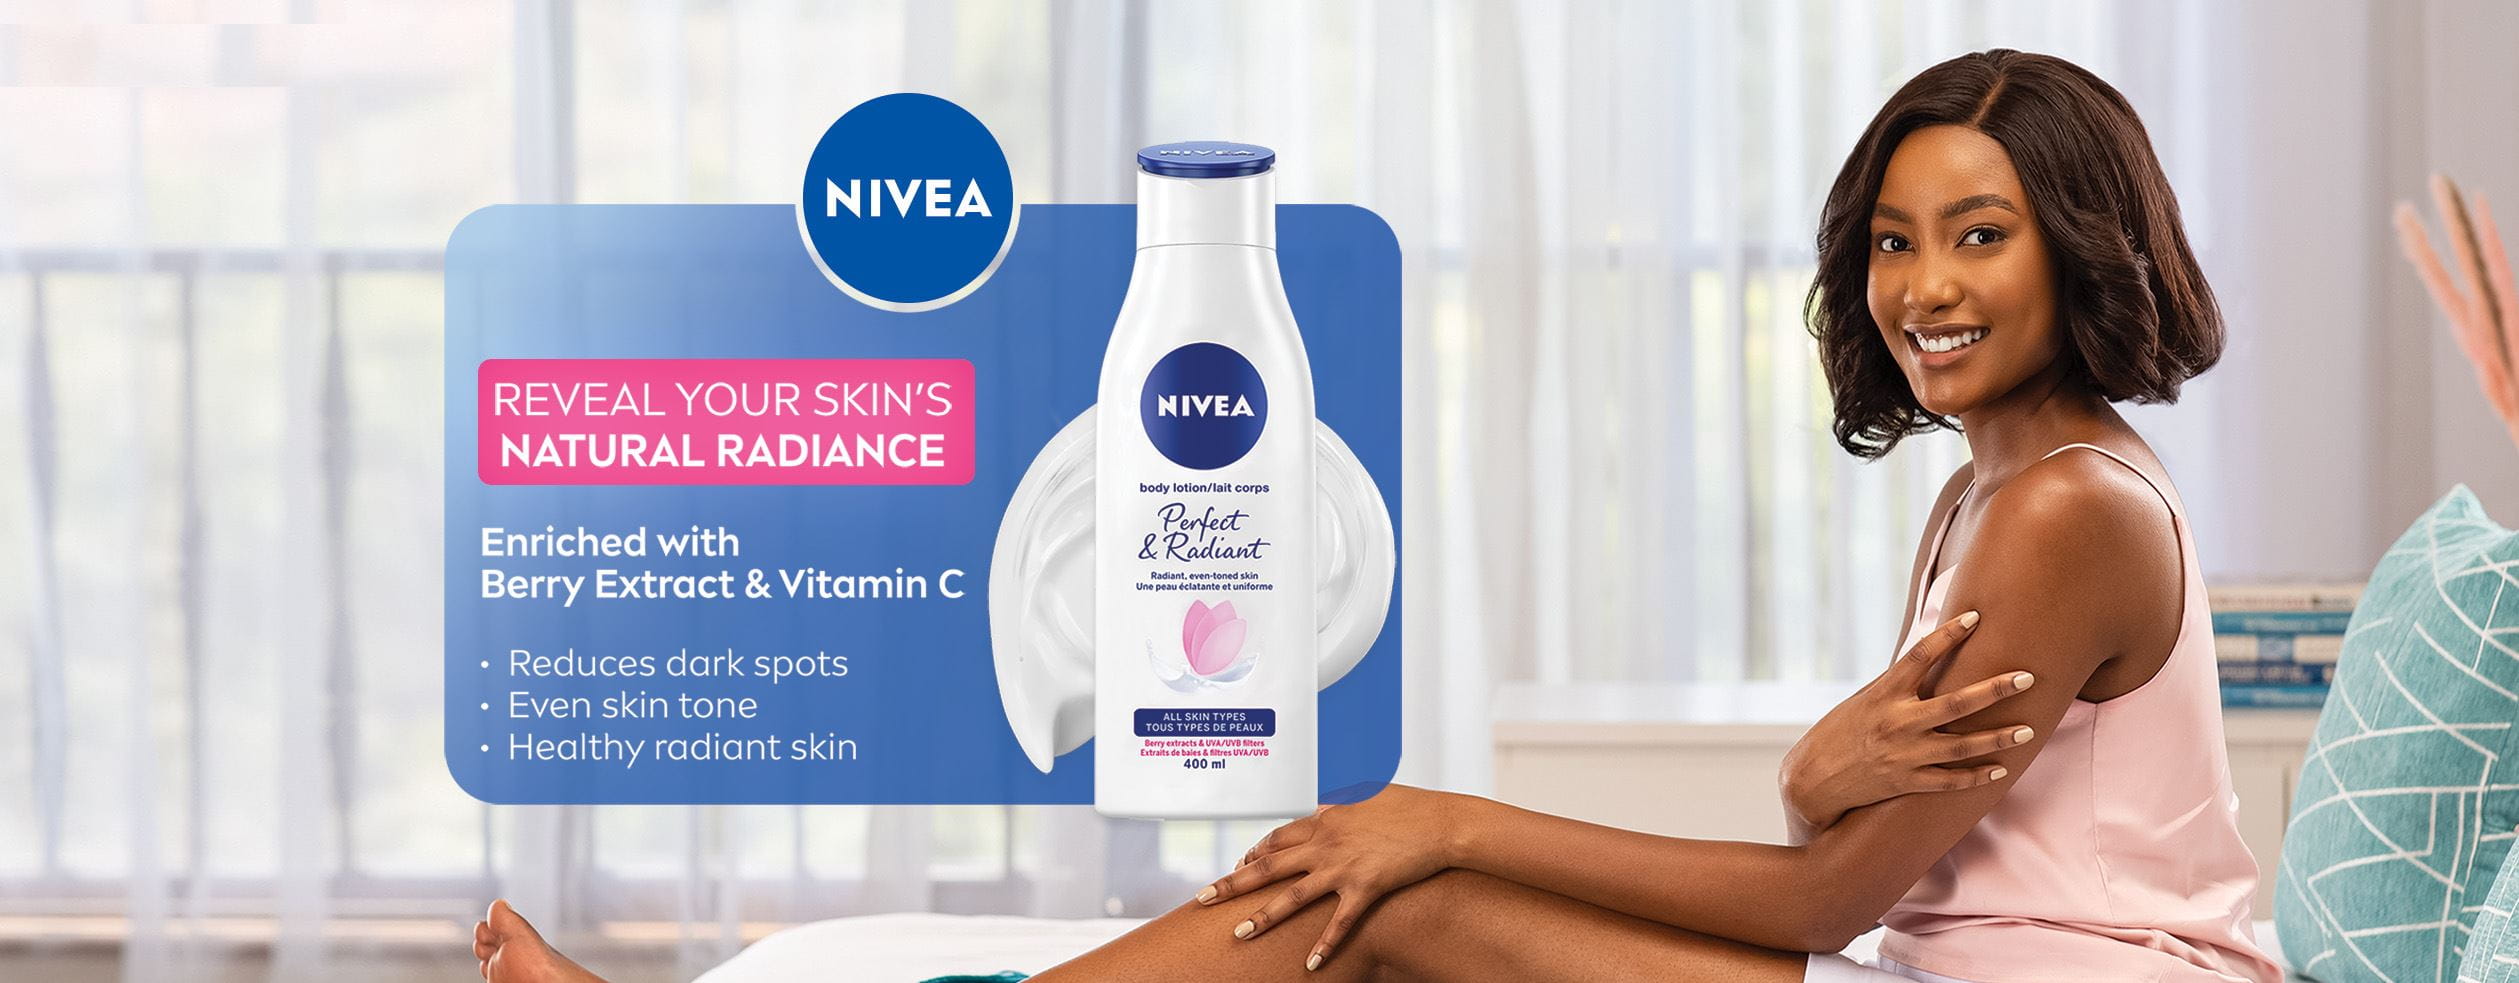 NIVEA Perfect & Radiant product and model